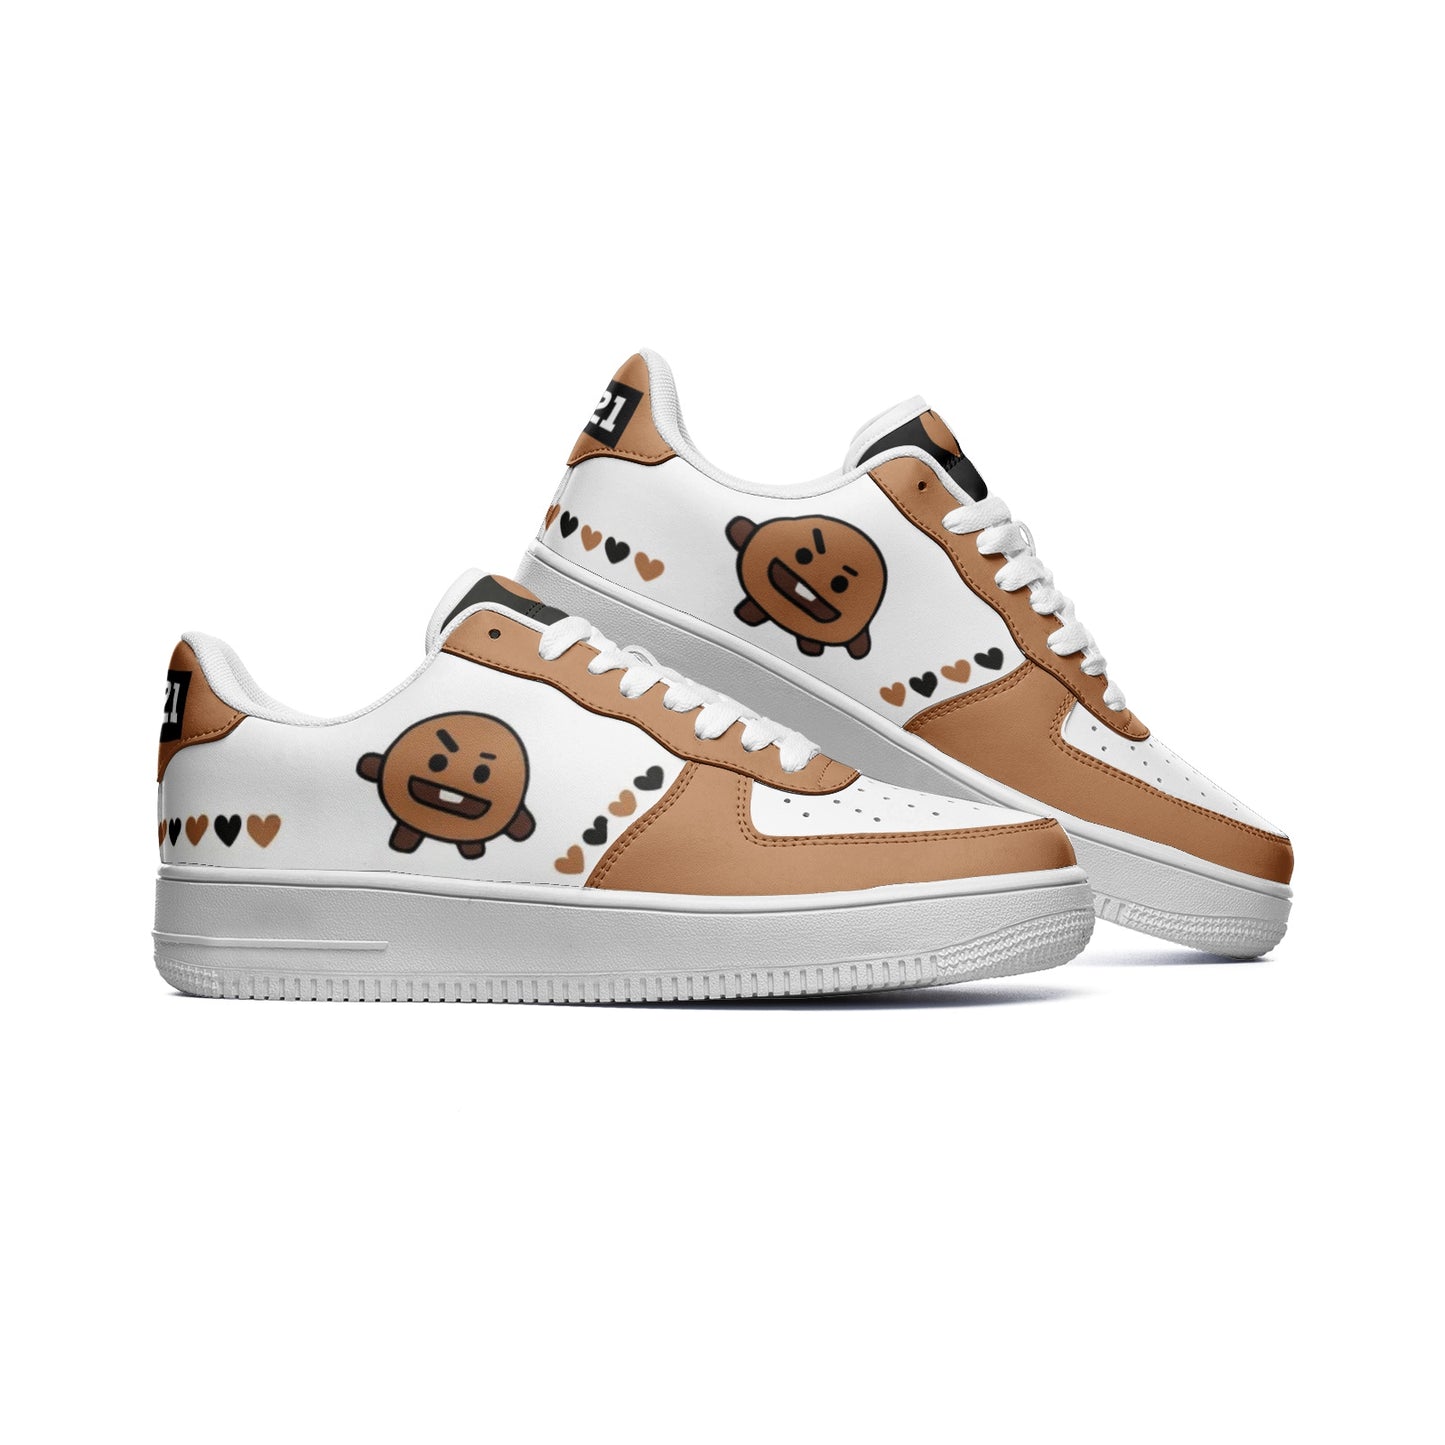 BT21 Shooky Unisex Low Top Leather Sneakers - SD-style-shop